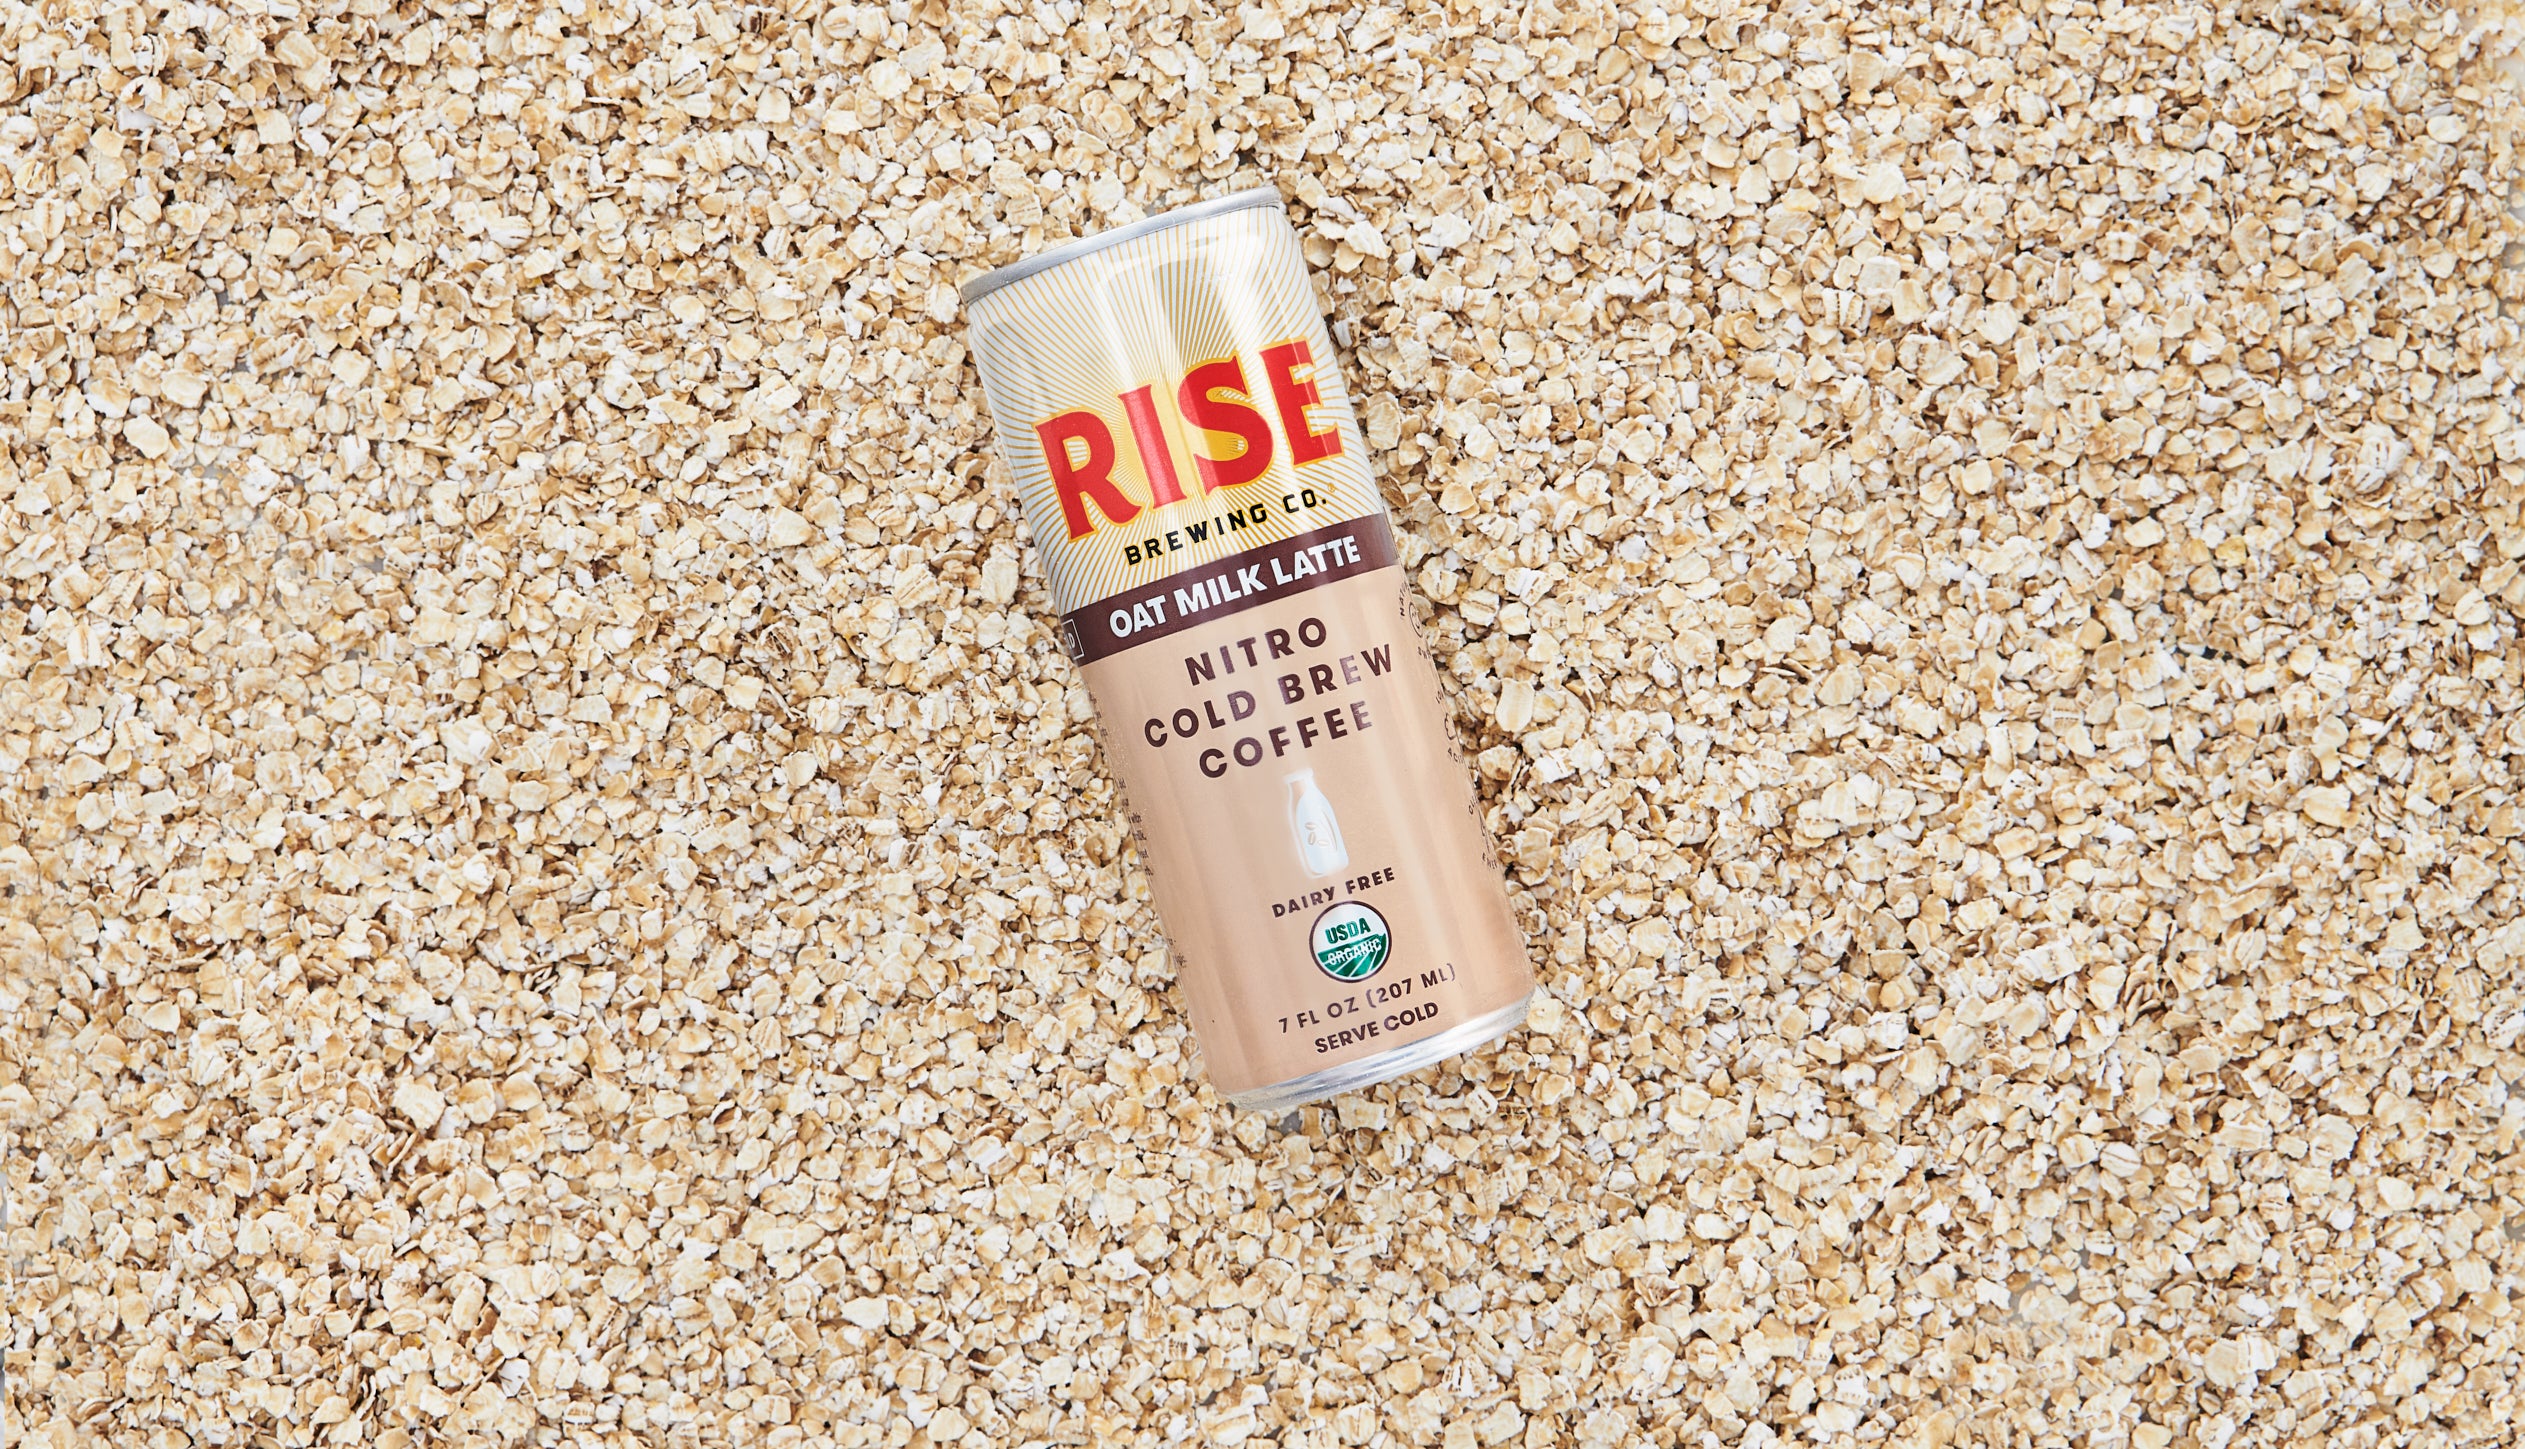 RISE Brewing Co. Oat Milk Latte Nitro Cold Brew Cans